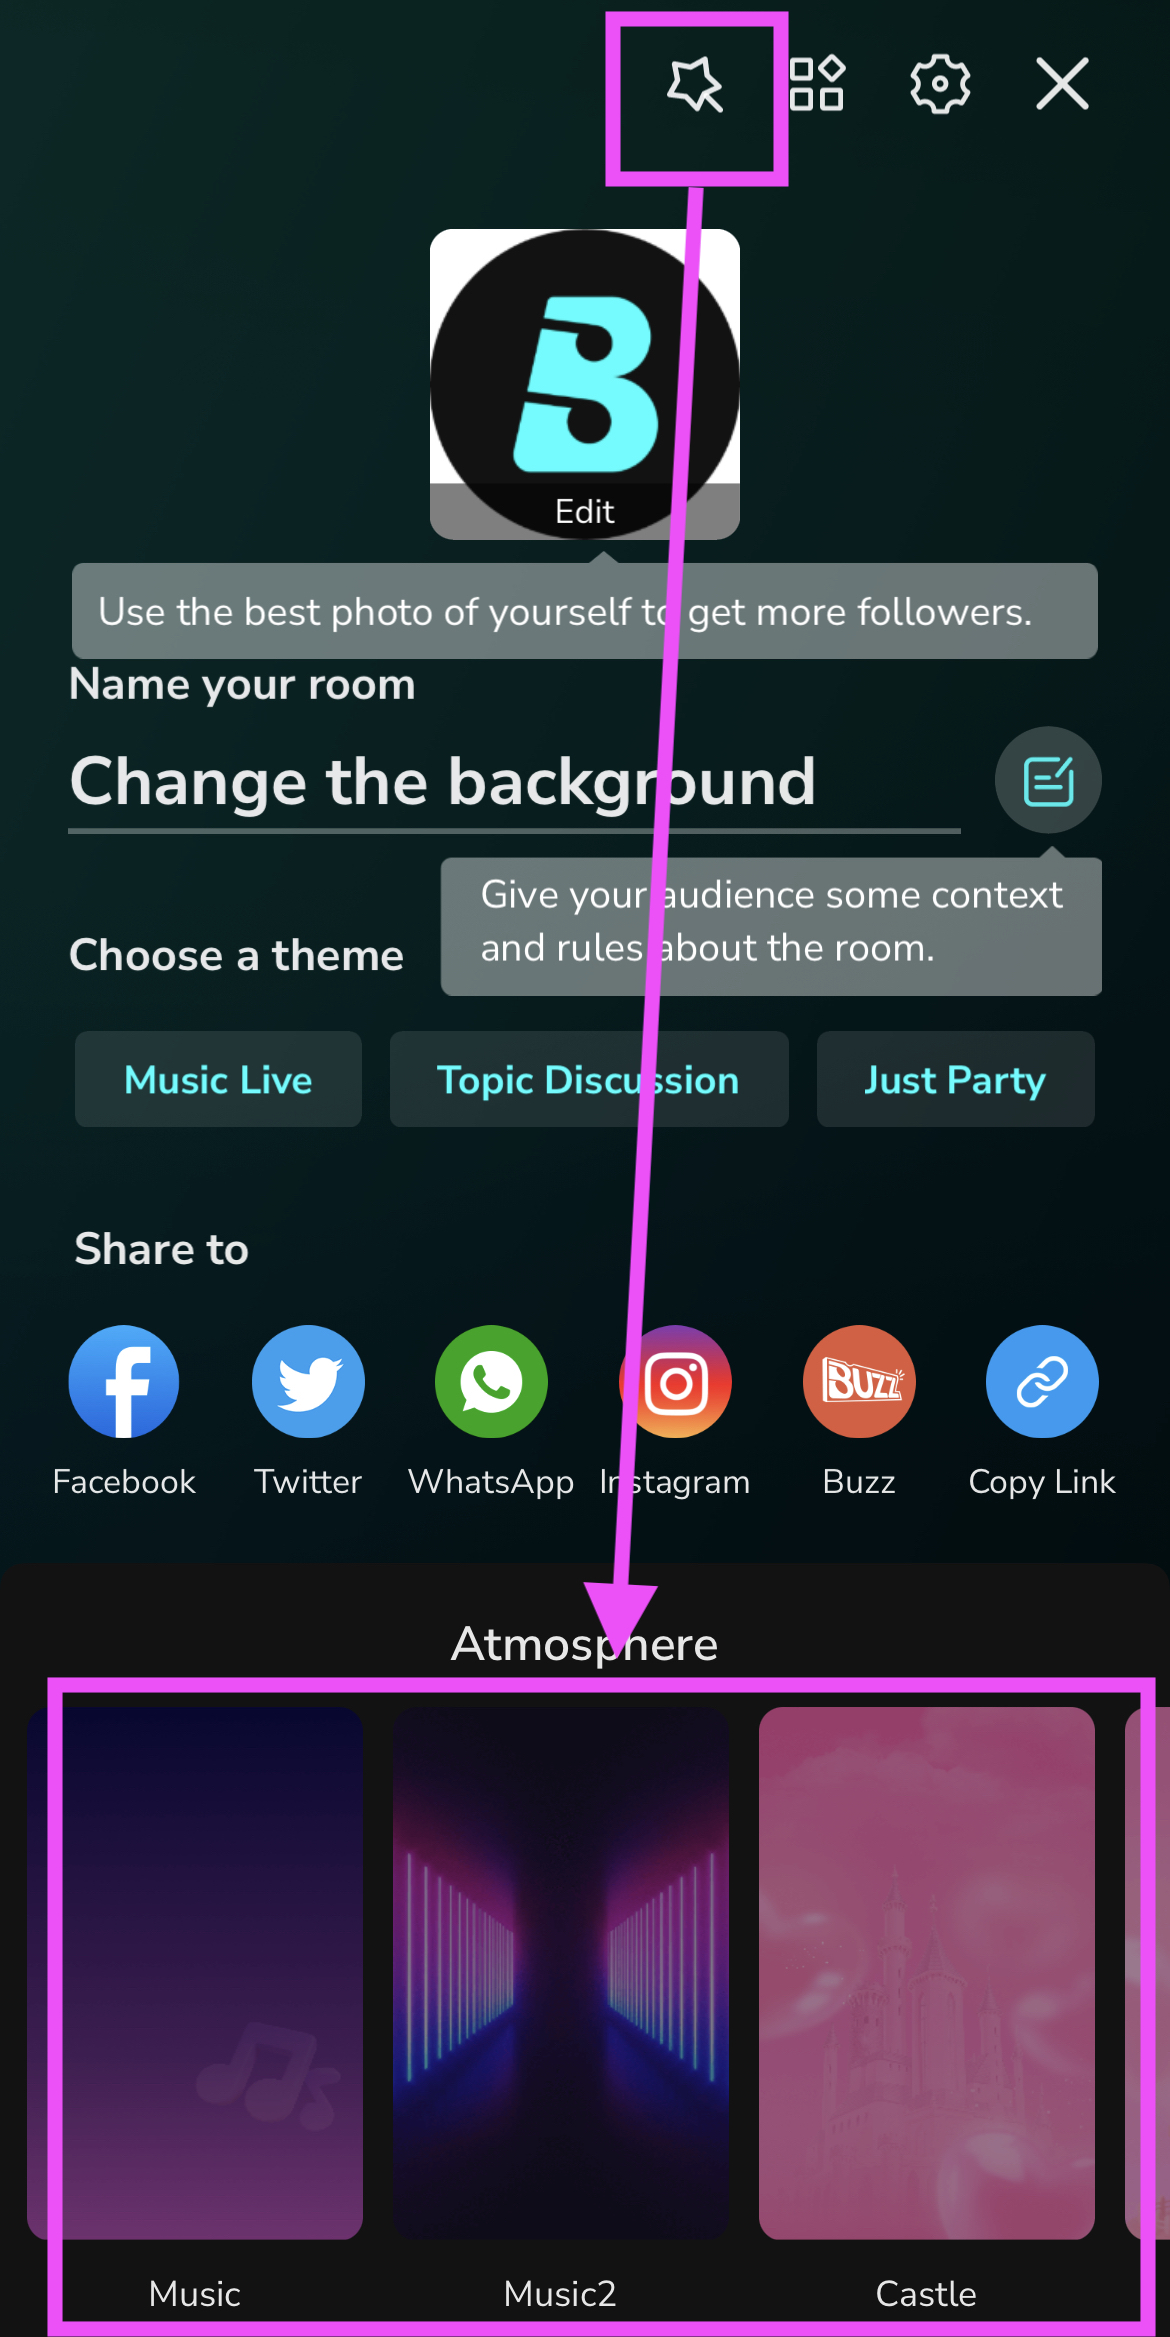 [BoomLive New Feature] Multiple Room Backgrounds!